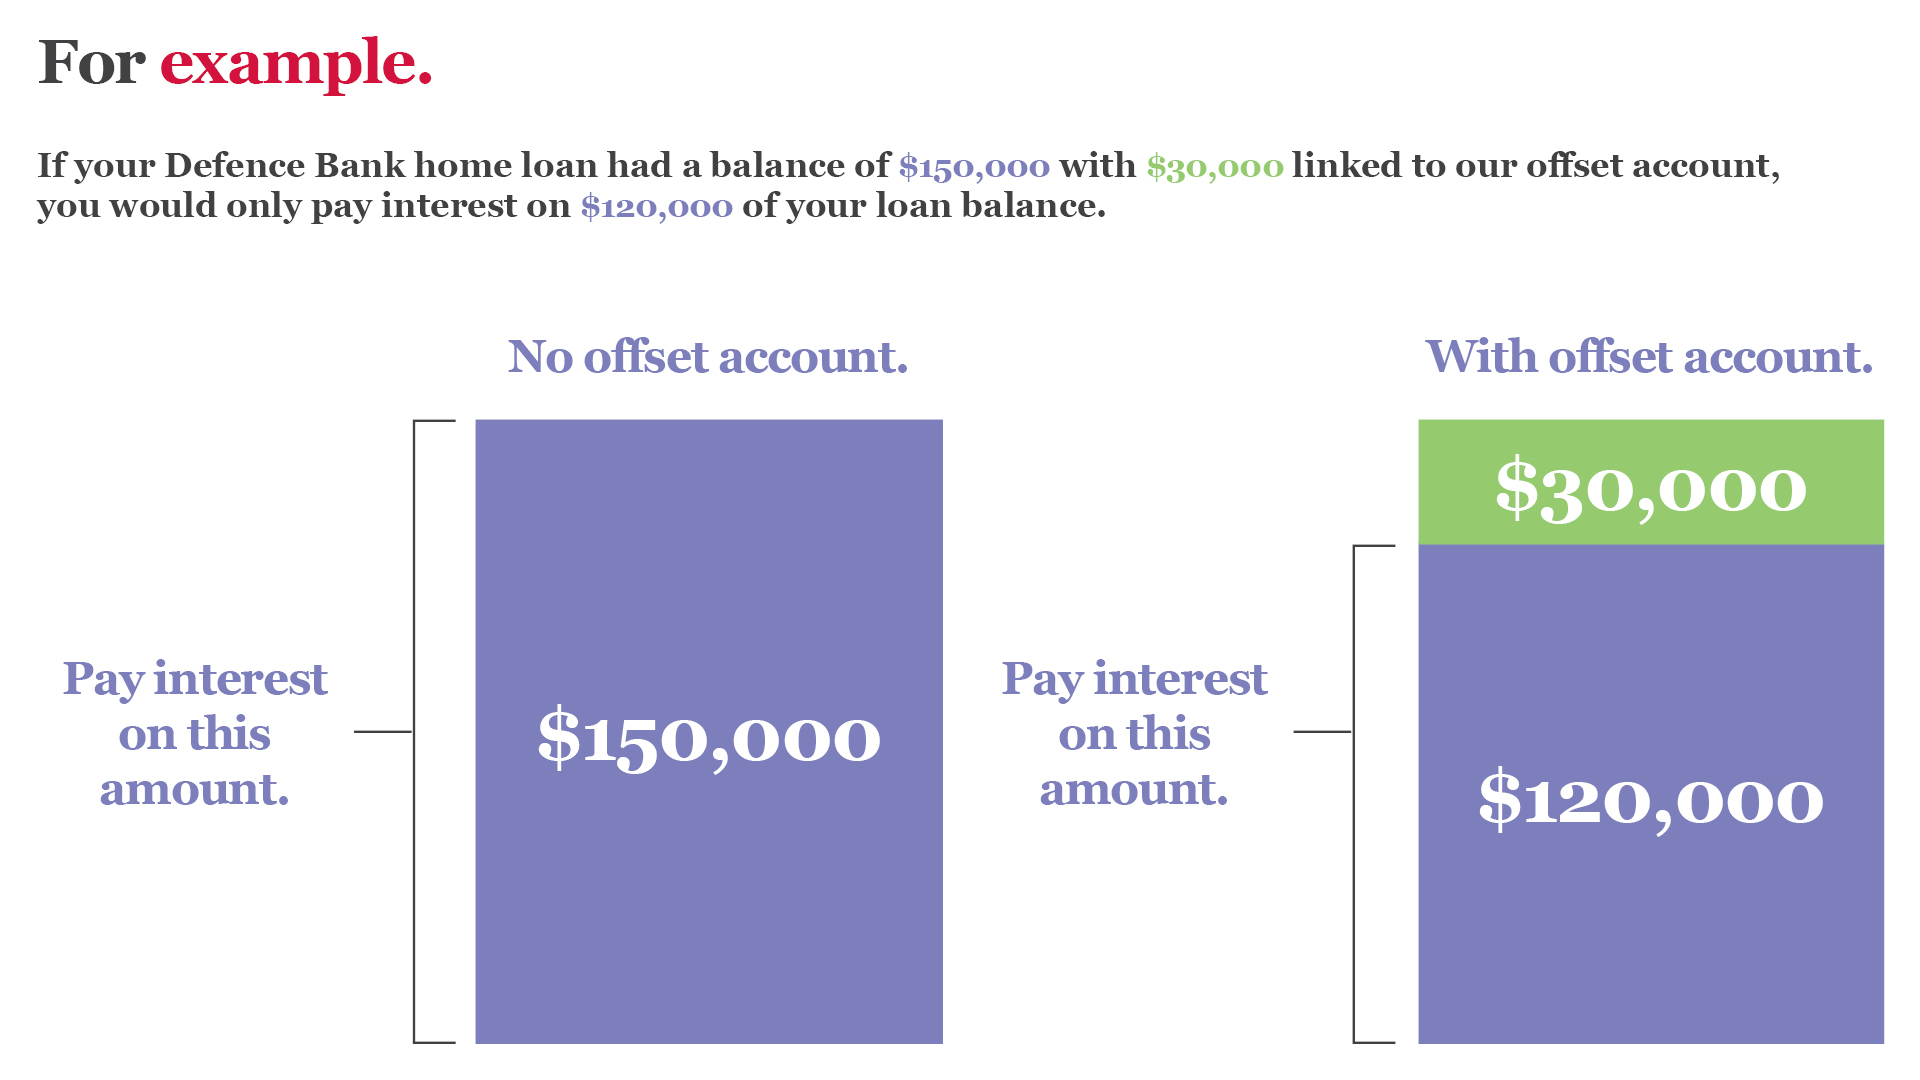 If your Defence Bank home loan had a balance of $150,000 with $30.000 linked to our offset account, you would only pay interest on $120,000 of your loan balance.